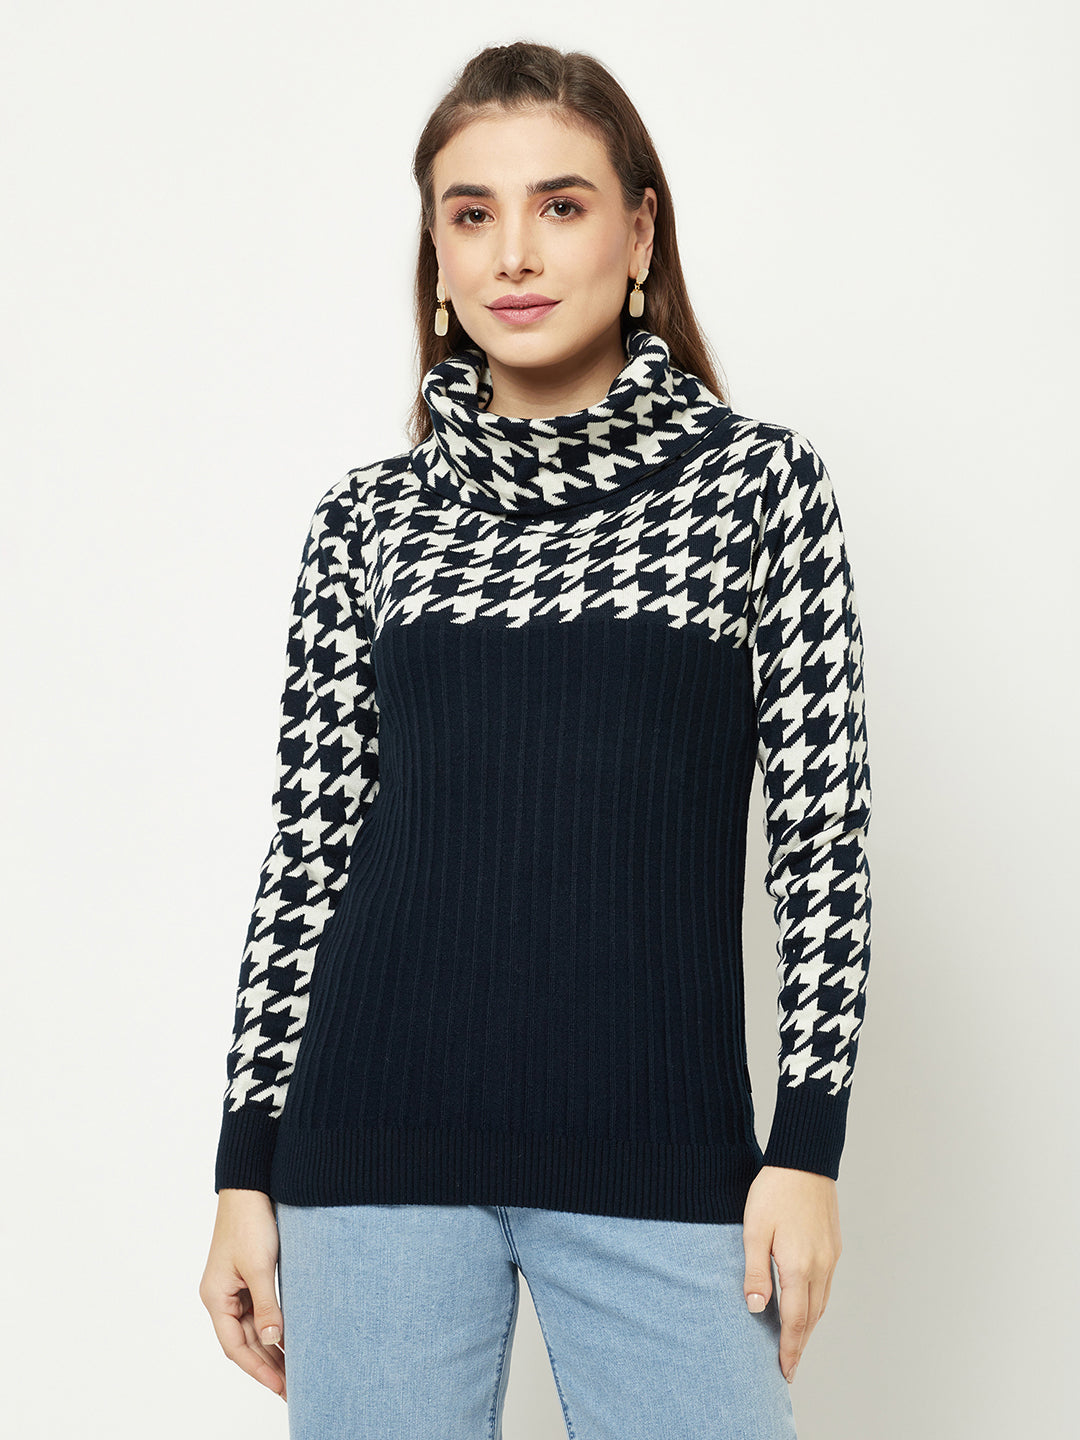  Navy Blue Abstract Turtleneck Sweater